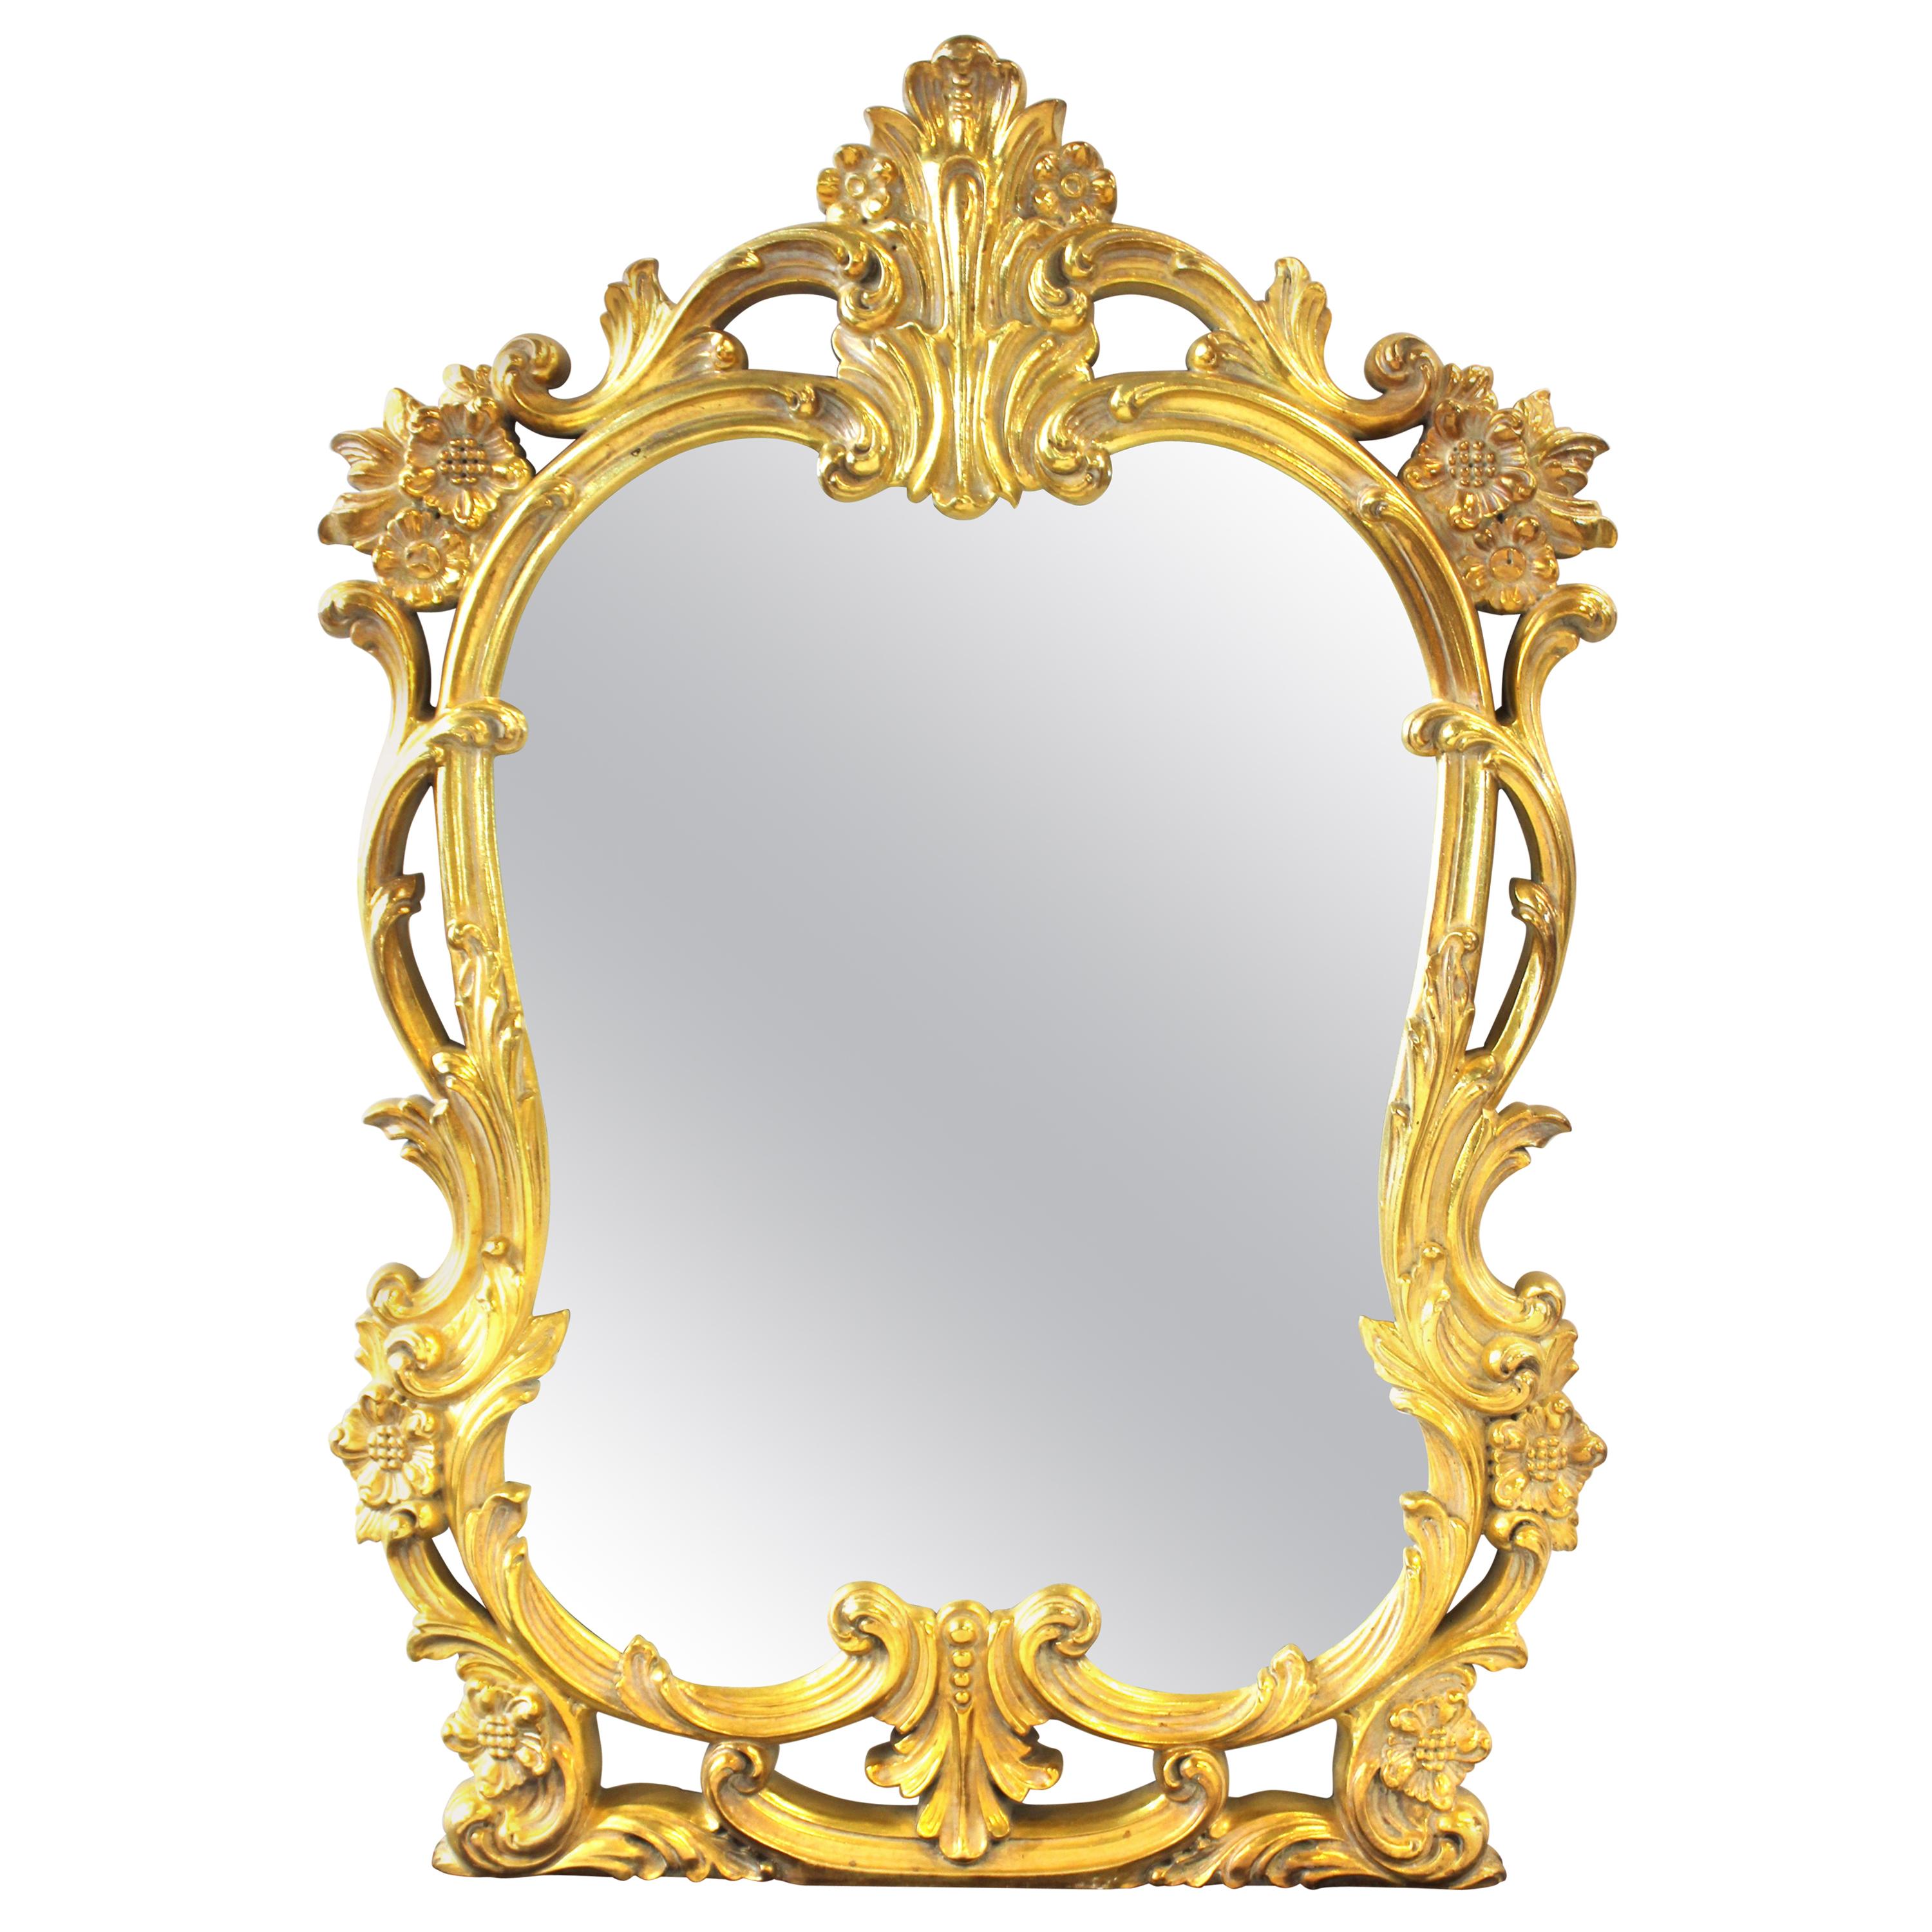 Hollywood Regency Baroque Revival Style Gold Frame Mirror